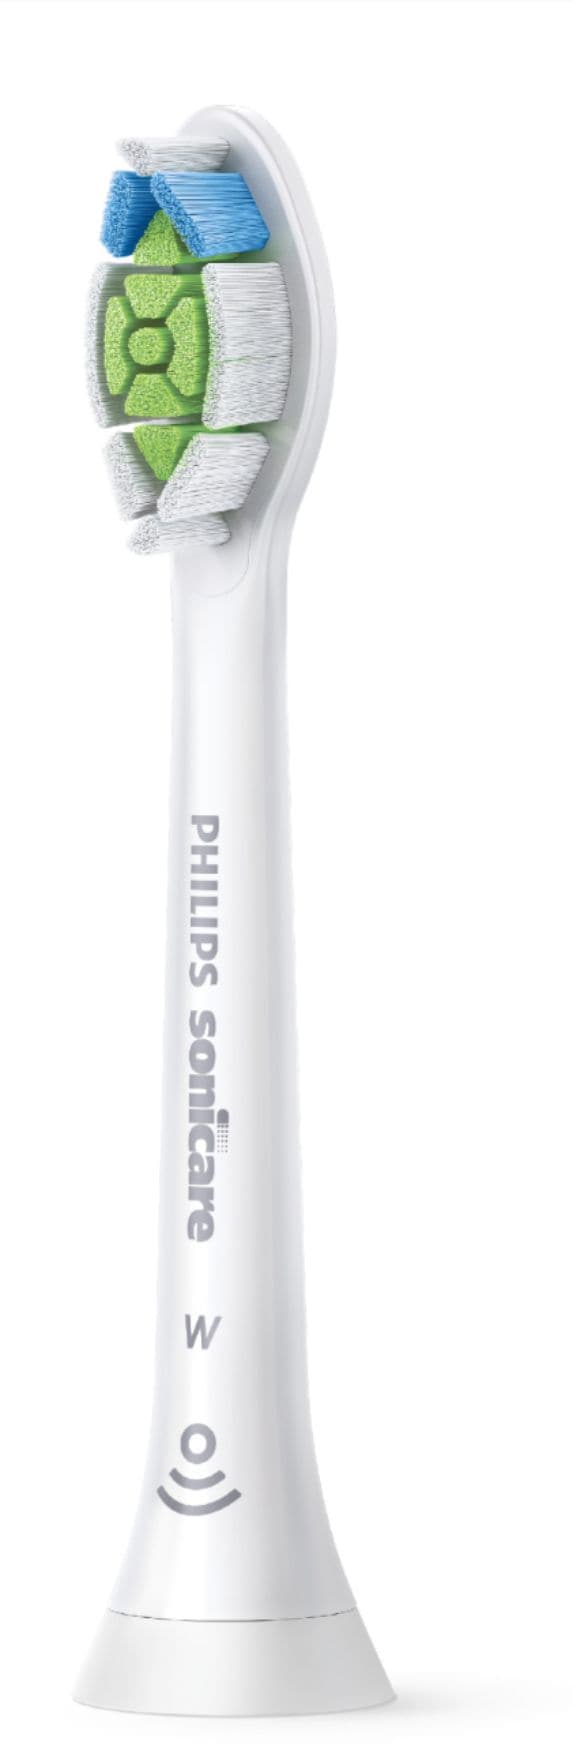 Philips Sonicare - ProtectiveClean 6100 Rechargeable Toothbrush - White_1